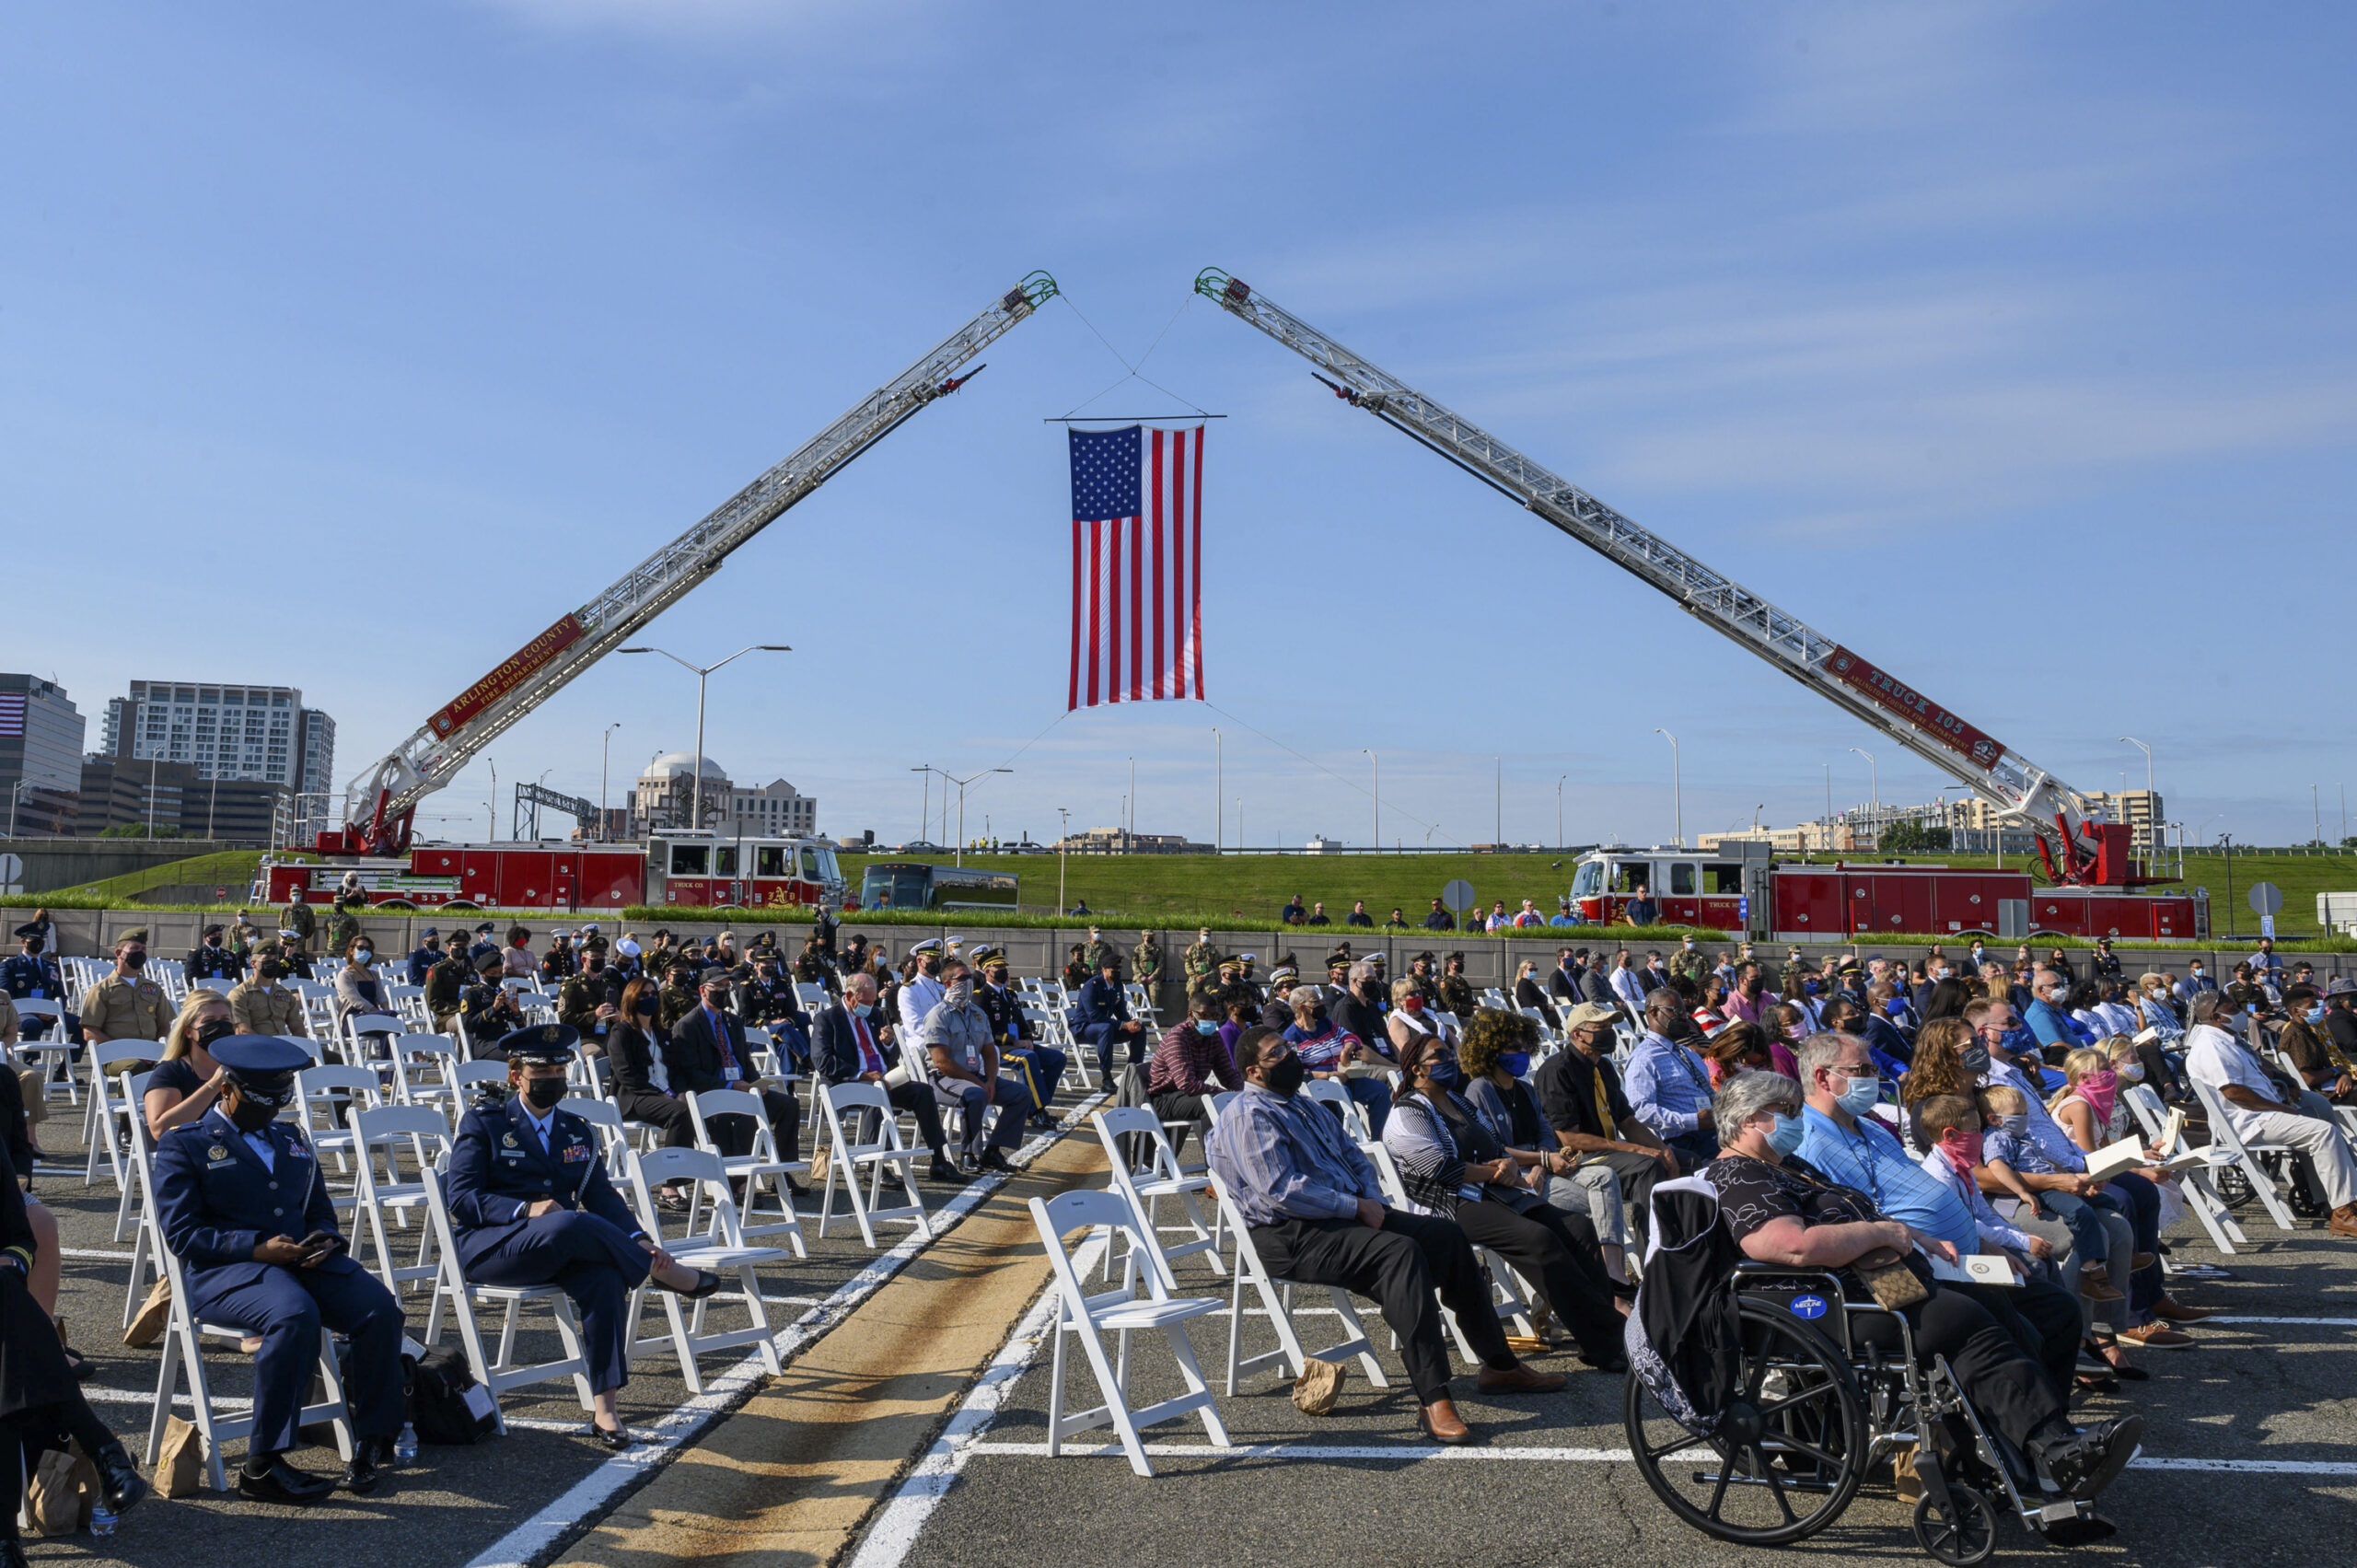 Remembering September 11th at the Pentagon